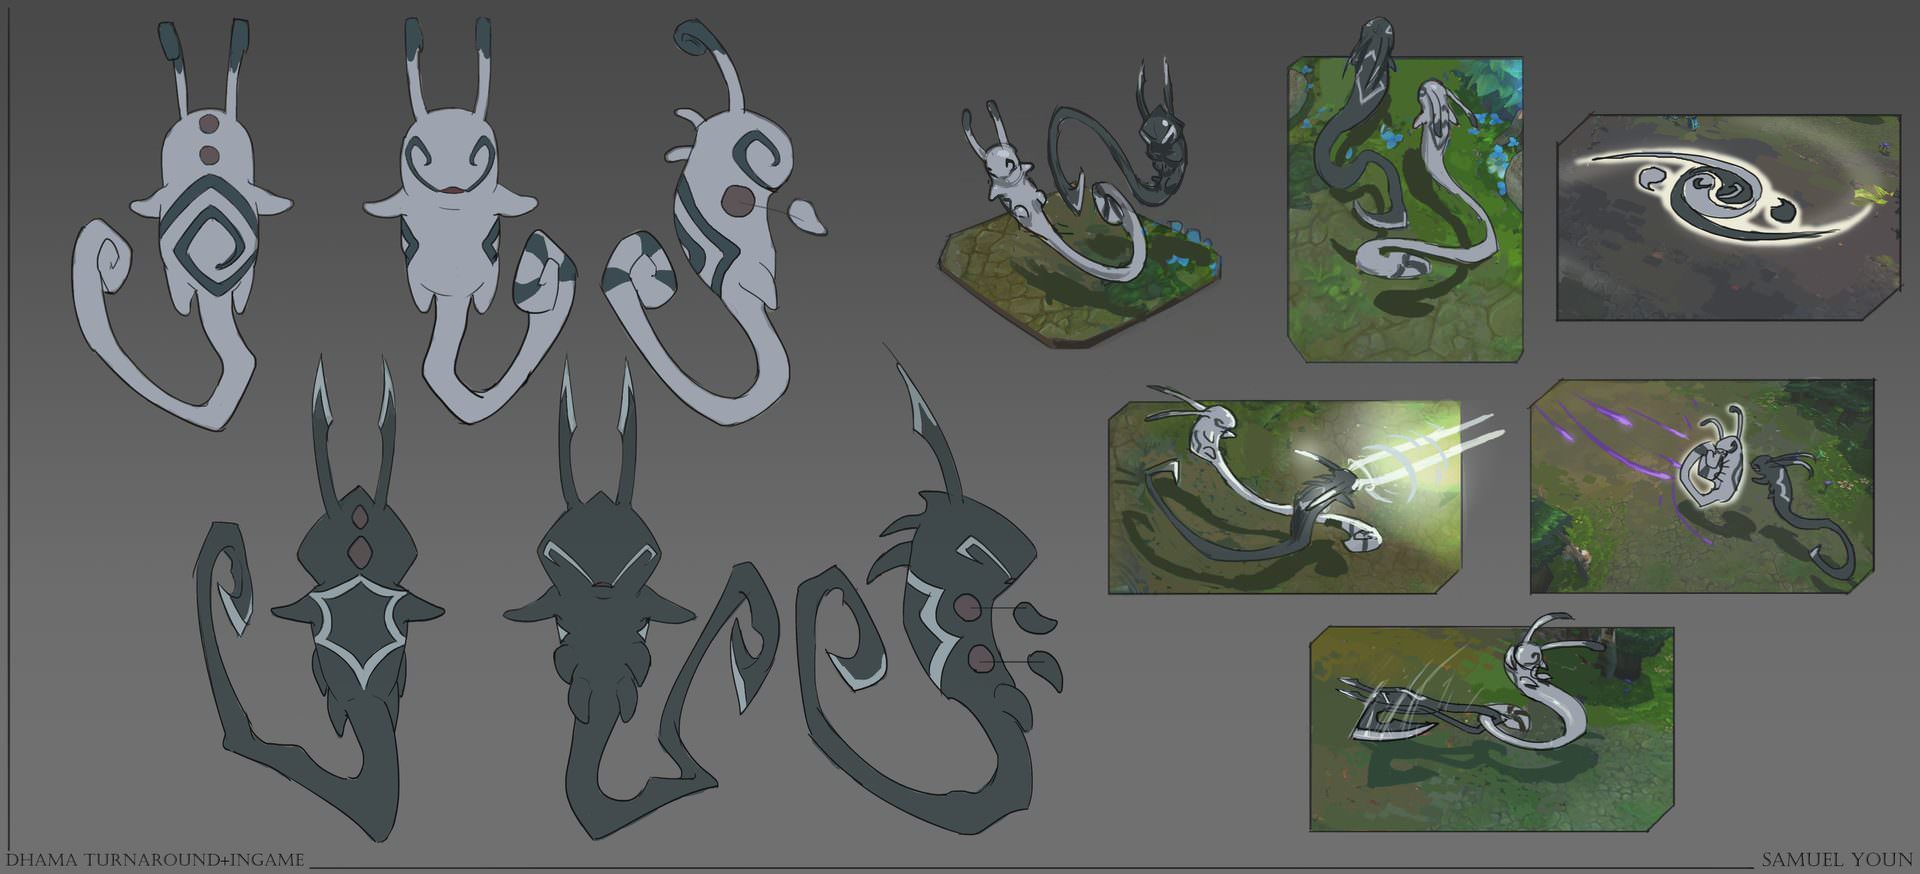 mynte Ledningsevne Sæt ud Fan Concepts Inspire New Champions in League of Legends. - Fextralife